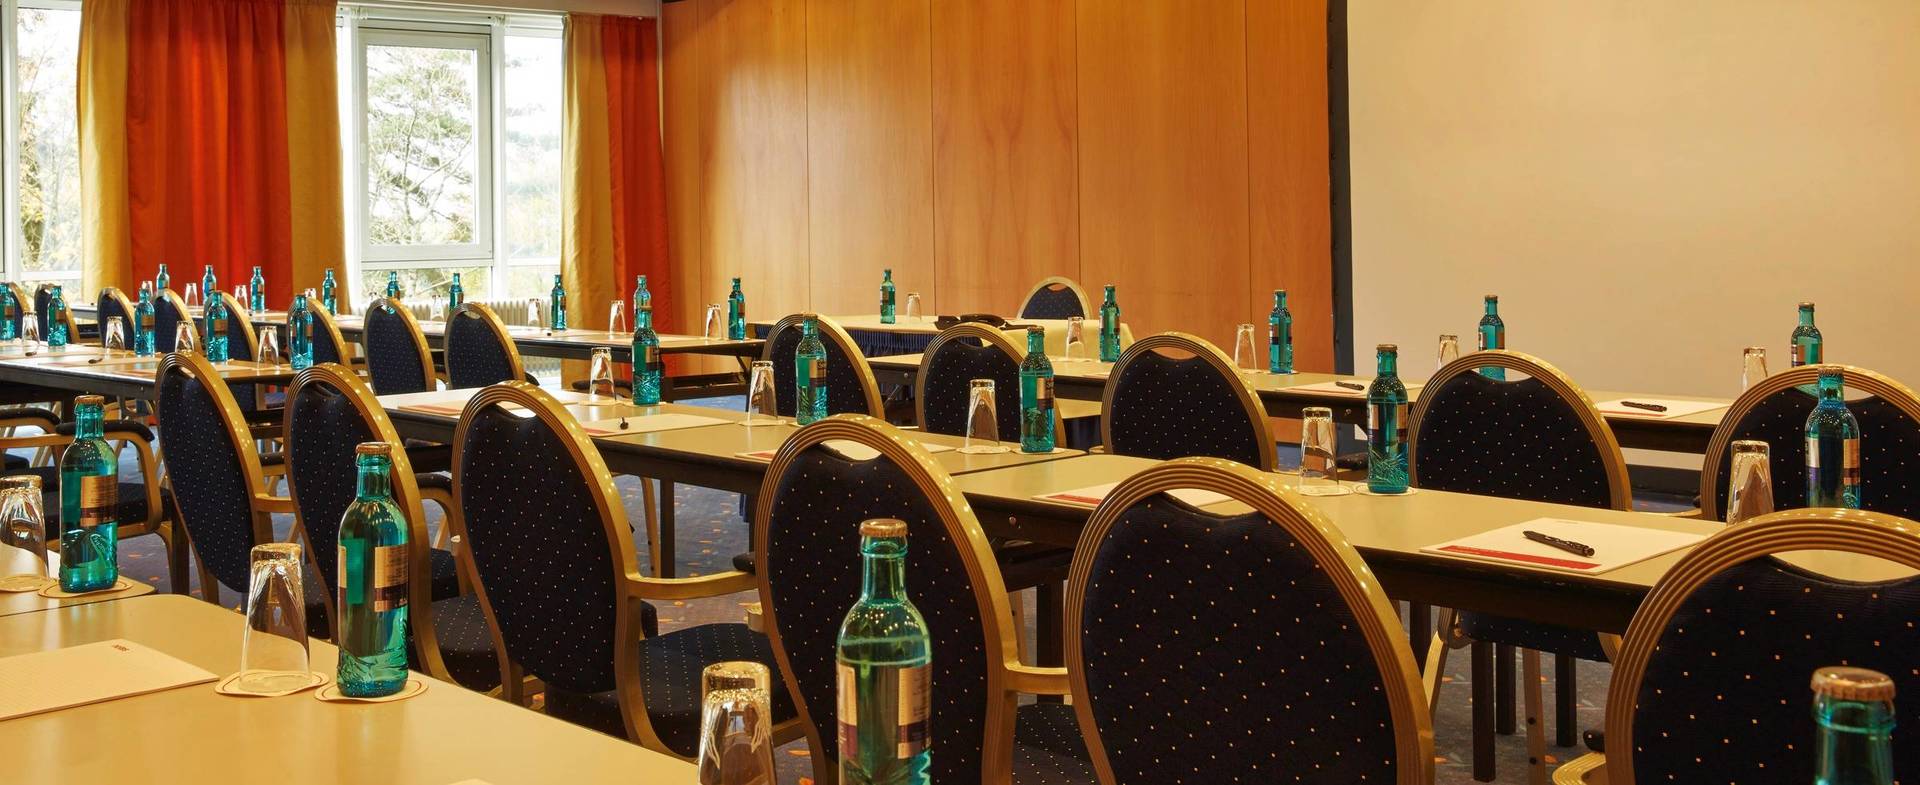 Fully equipped meeting rooms at the H+ Hotel & Spa Friedrichroda - Official website